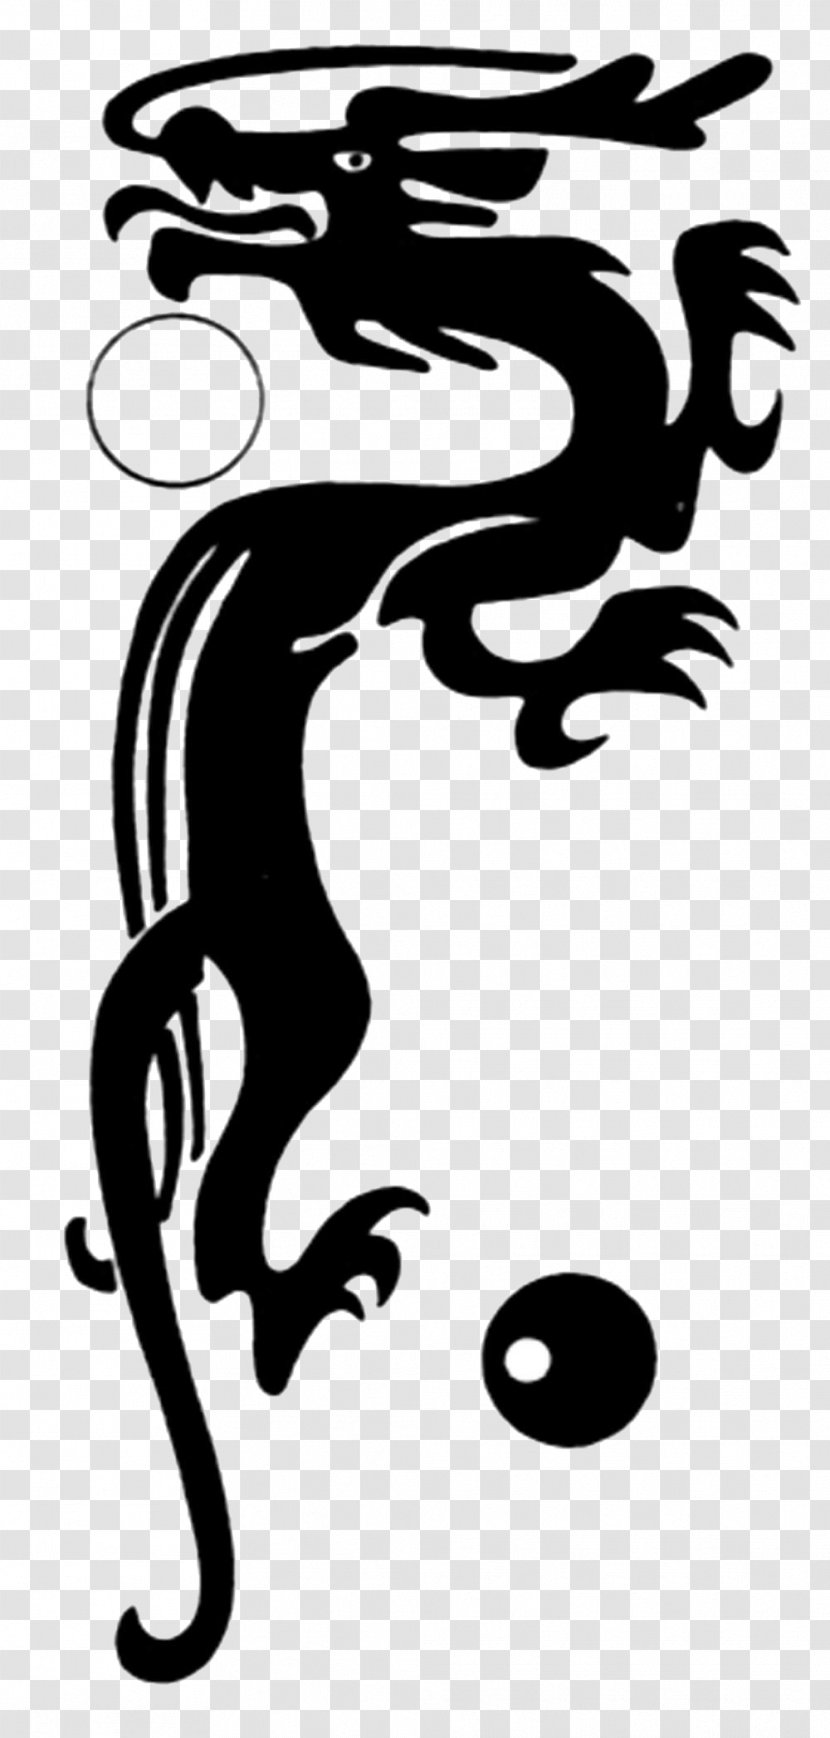 Chinese Dragon Silhouette - Black And White Transparent PNG